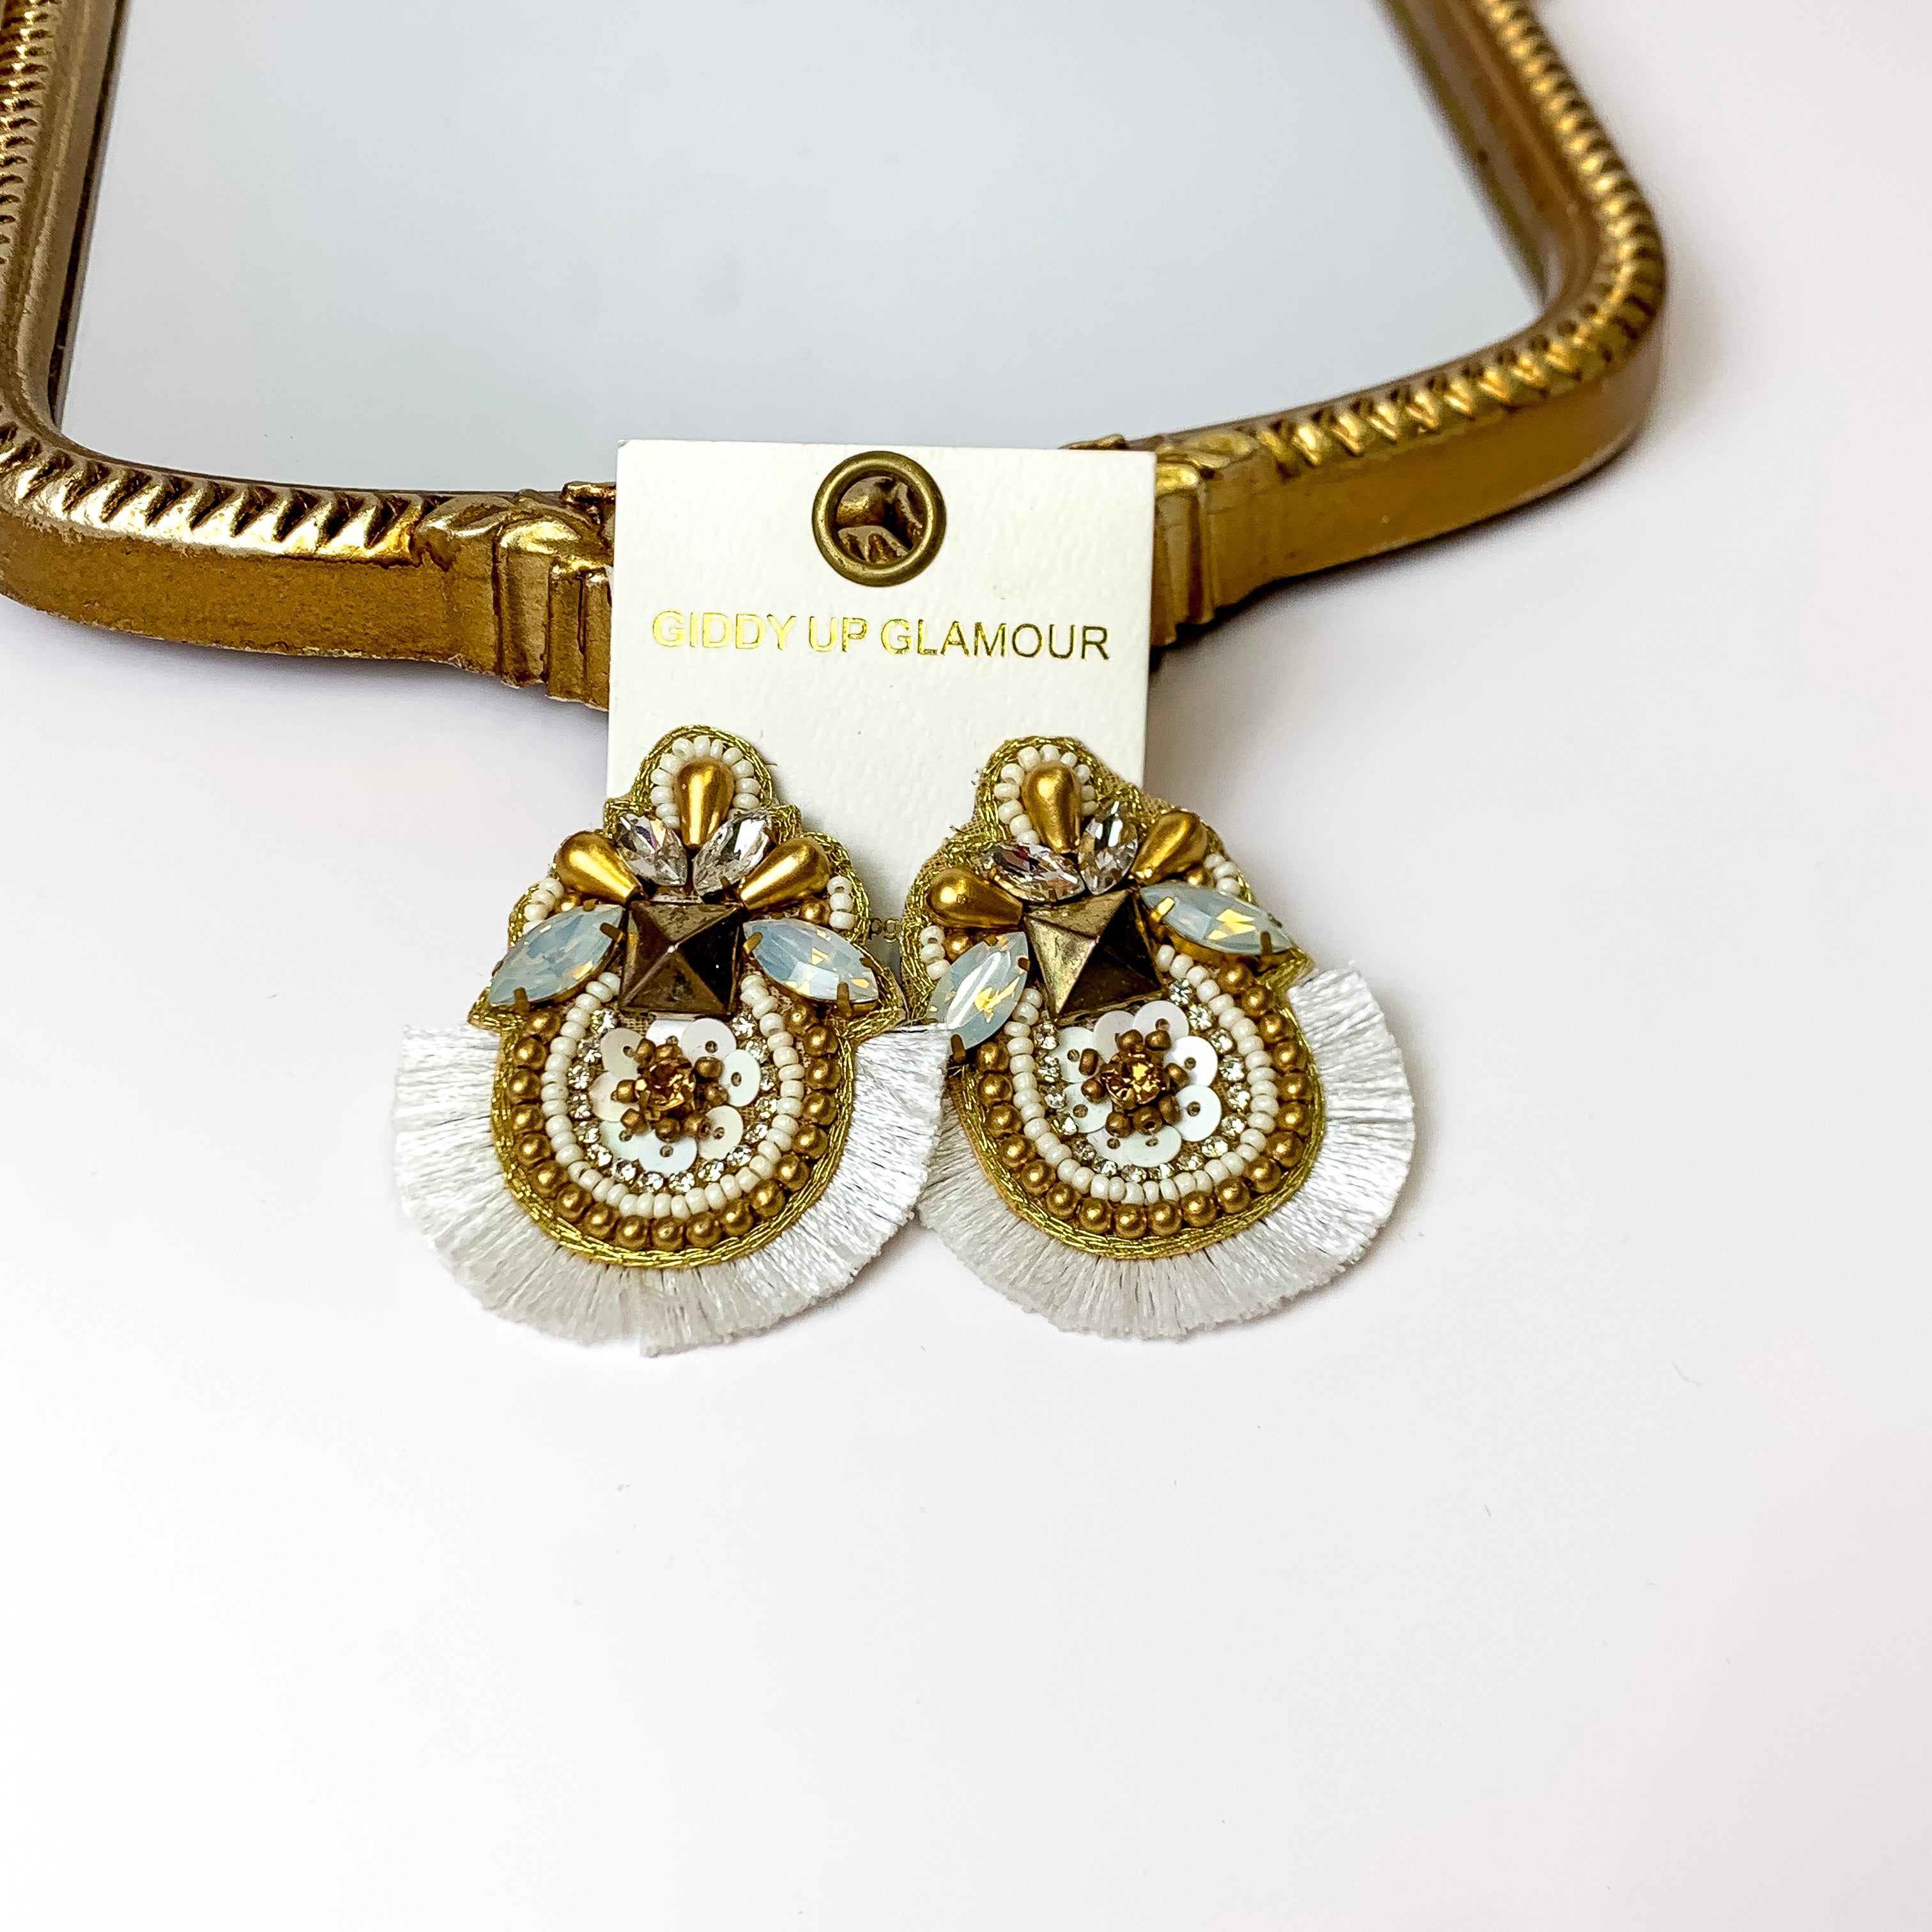 Beaded Statement Earrings with Fringe Outline in White and Gold - Giddy Up Glamour Boutique